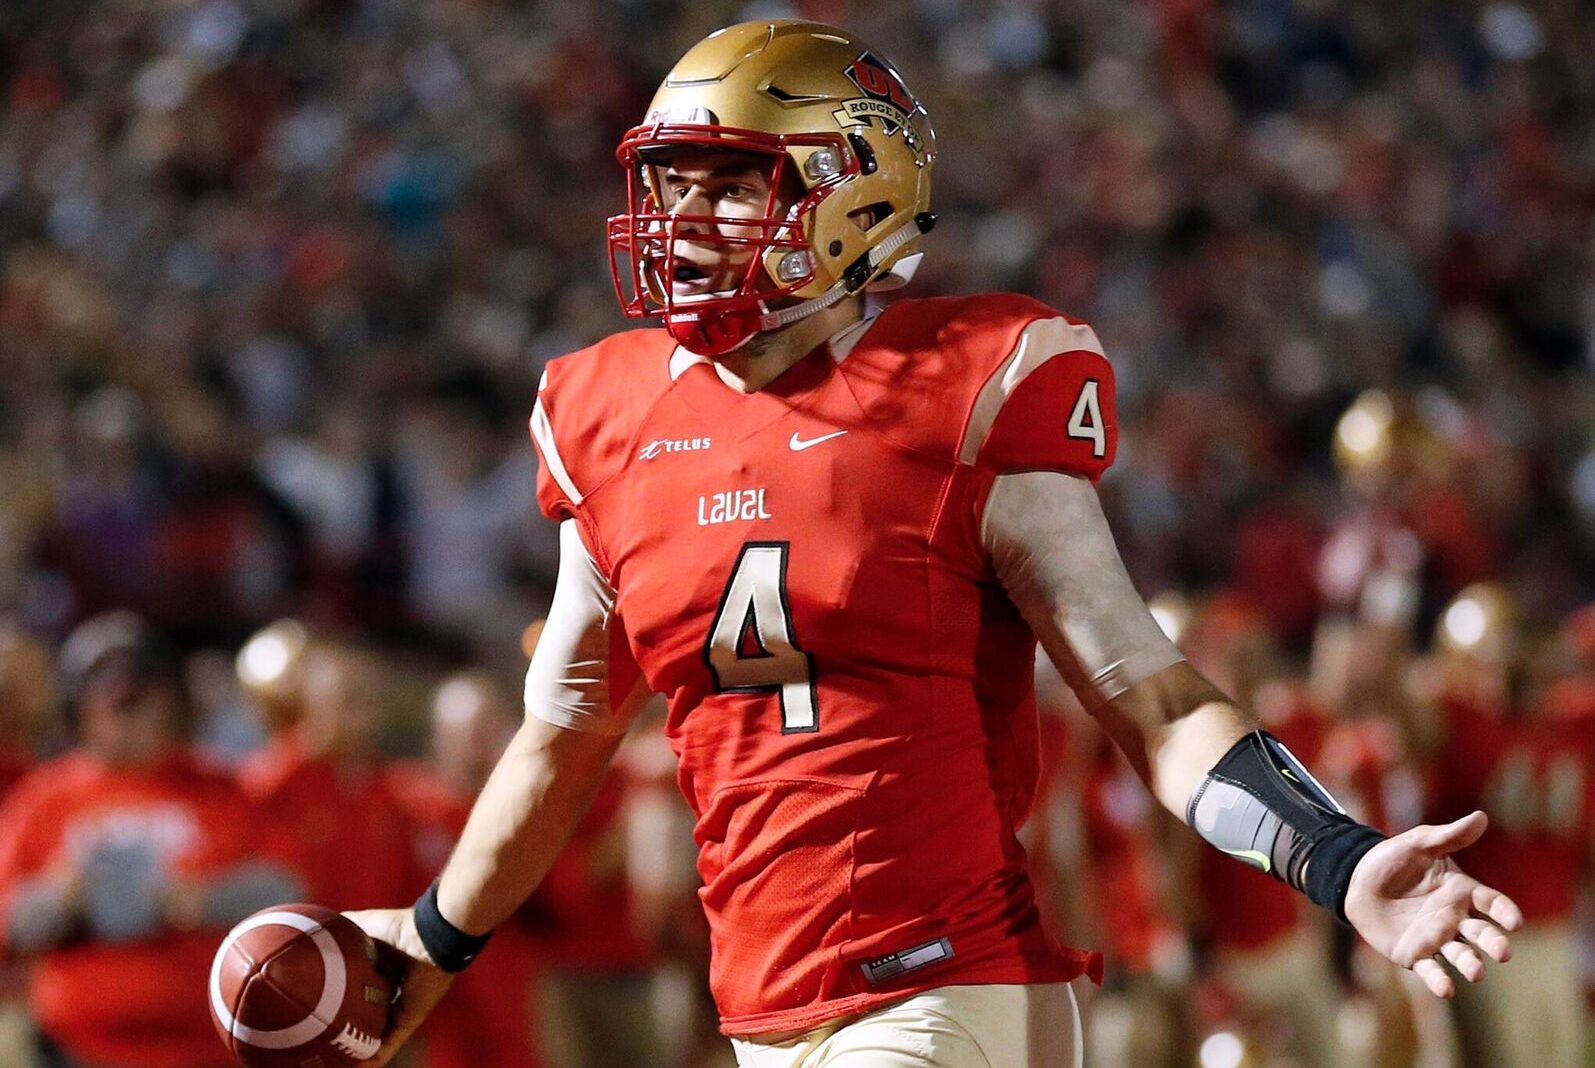 Football Top 10 (#2): Reigning Vanier Cup champs remain unanimous No. 1 pick